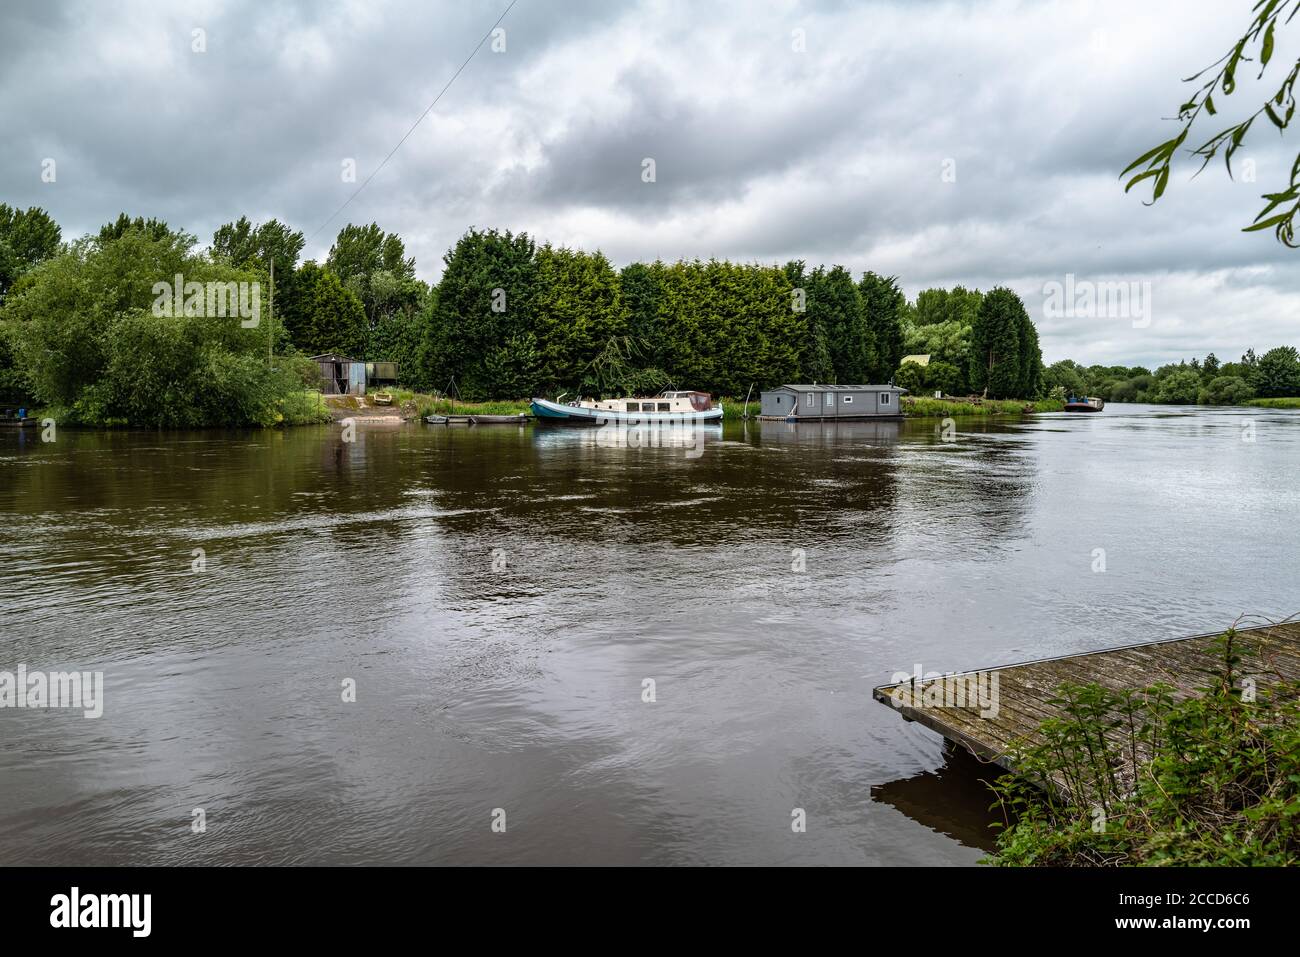 Looking across the River Trent at Farndon, in Nottinghamshire, towards an old boat slip and moored boats. Stock Photo